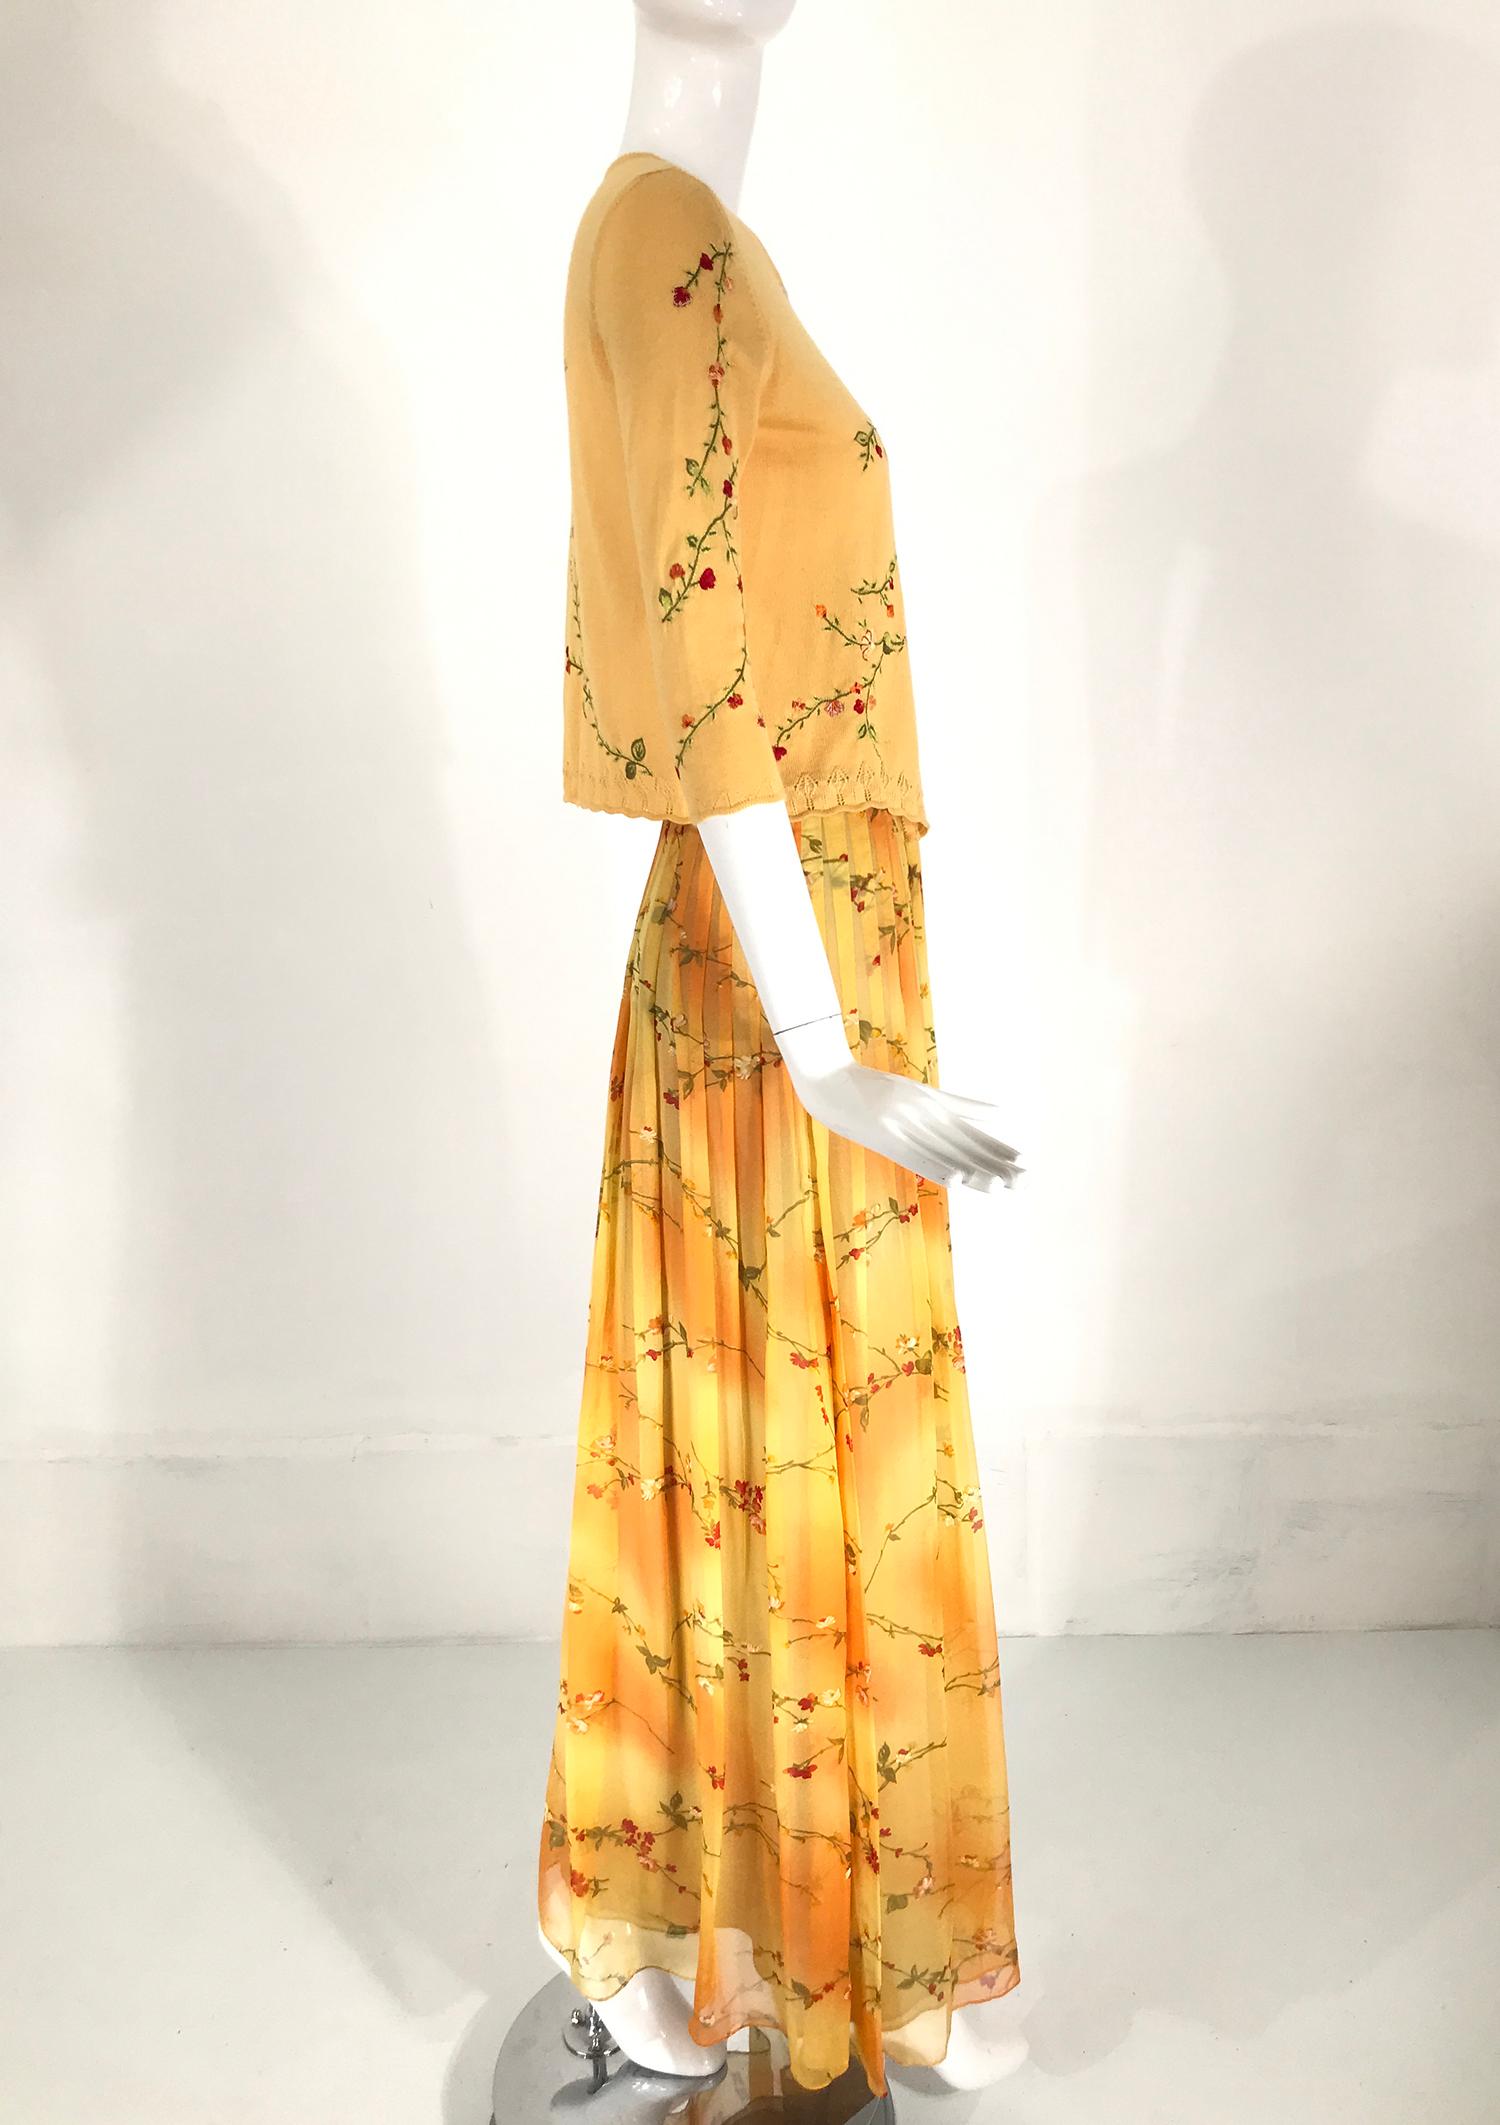 Oscar de la Renta 2pc embroidered cropped cashmere/silk sweater and coordinating printed silk maxi skirt. The yellow sweater has a single button closure at the neck front, elbow length sleeves and is cropped to the waist, embroidered with green